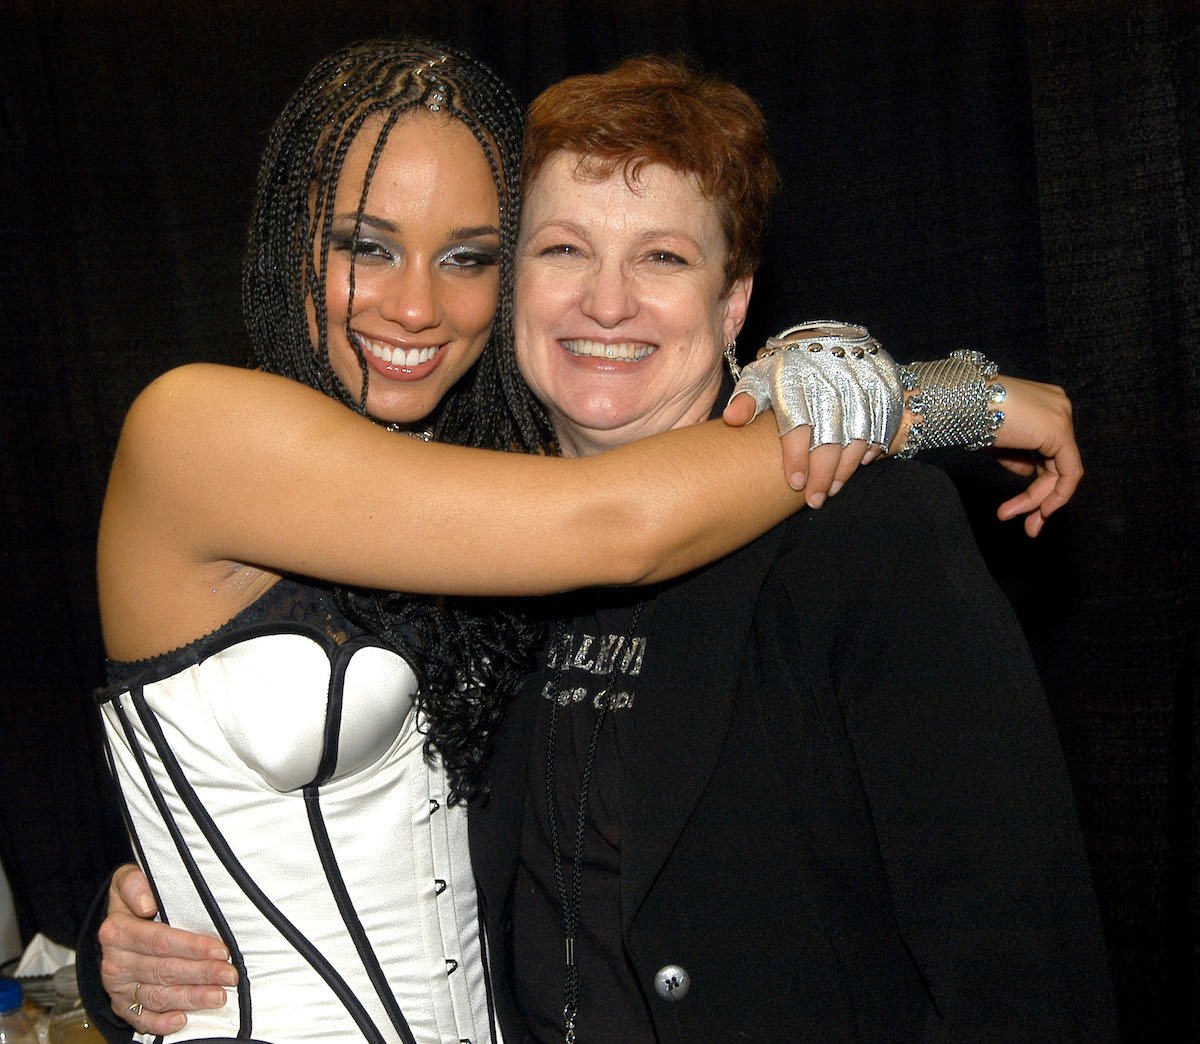 Singer Alicia Keys and mother Terri Augello attend a media event together in 2004